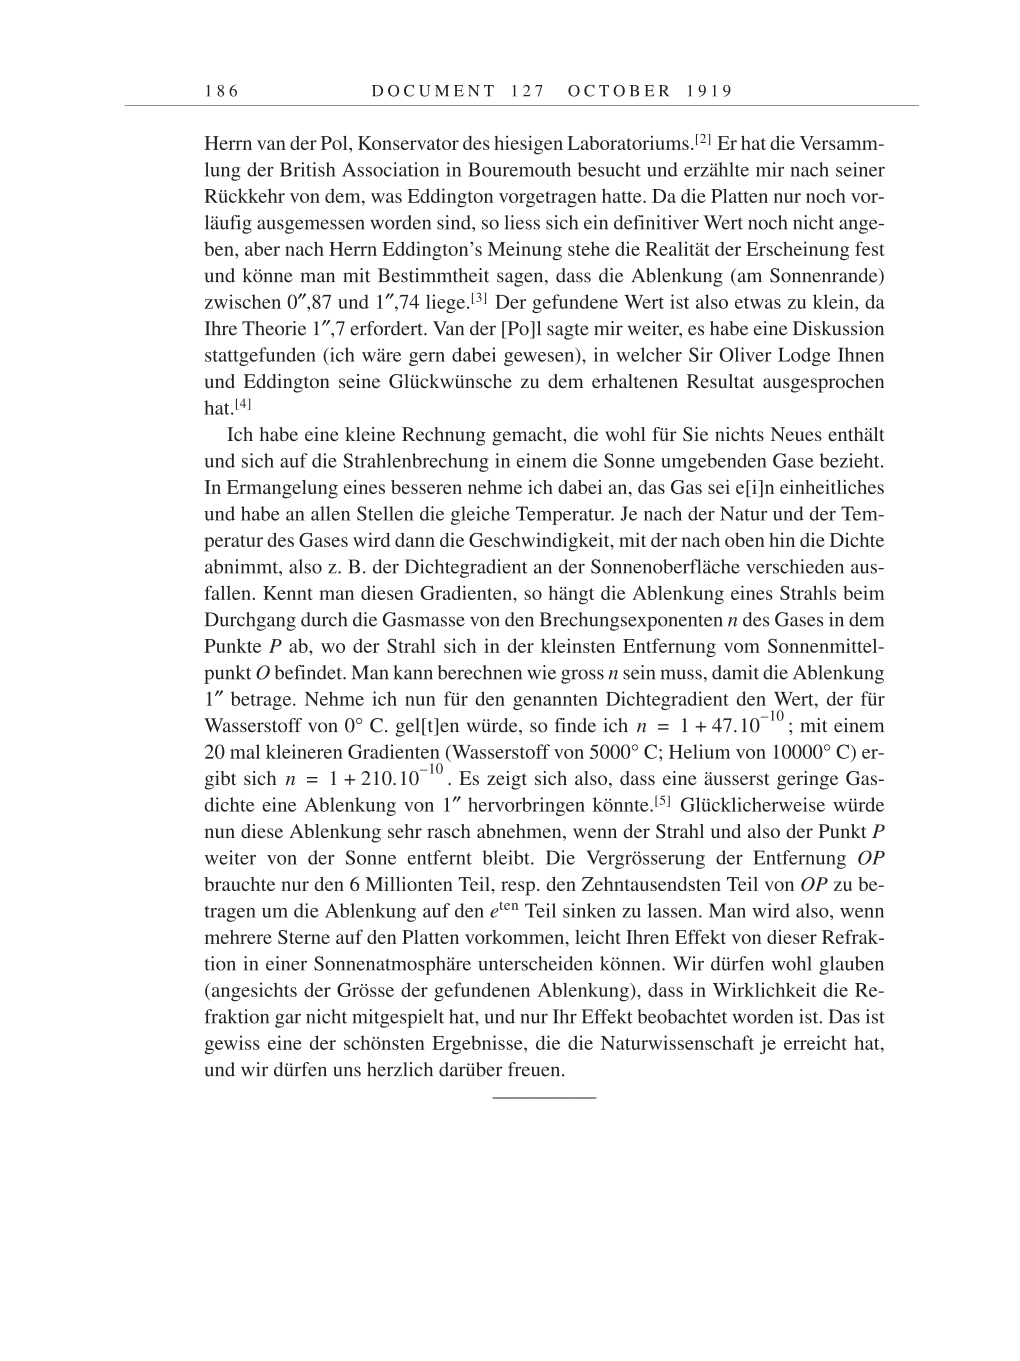 Volume 9: The Berlin Years: Correspondence January 1919-April 1920 page 186